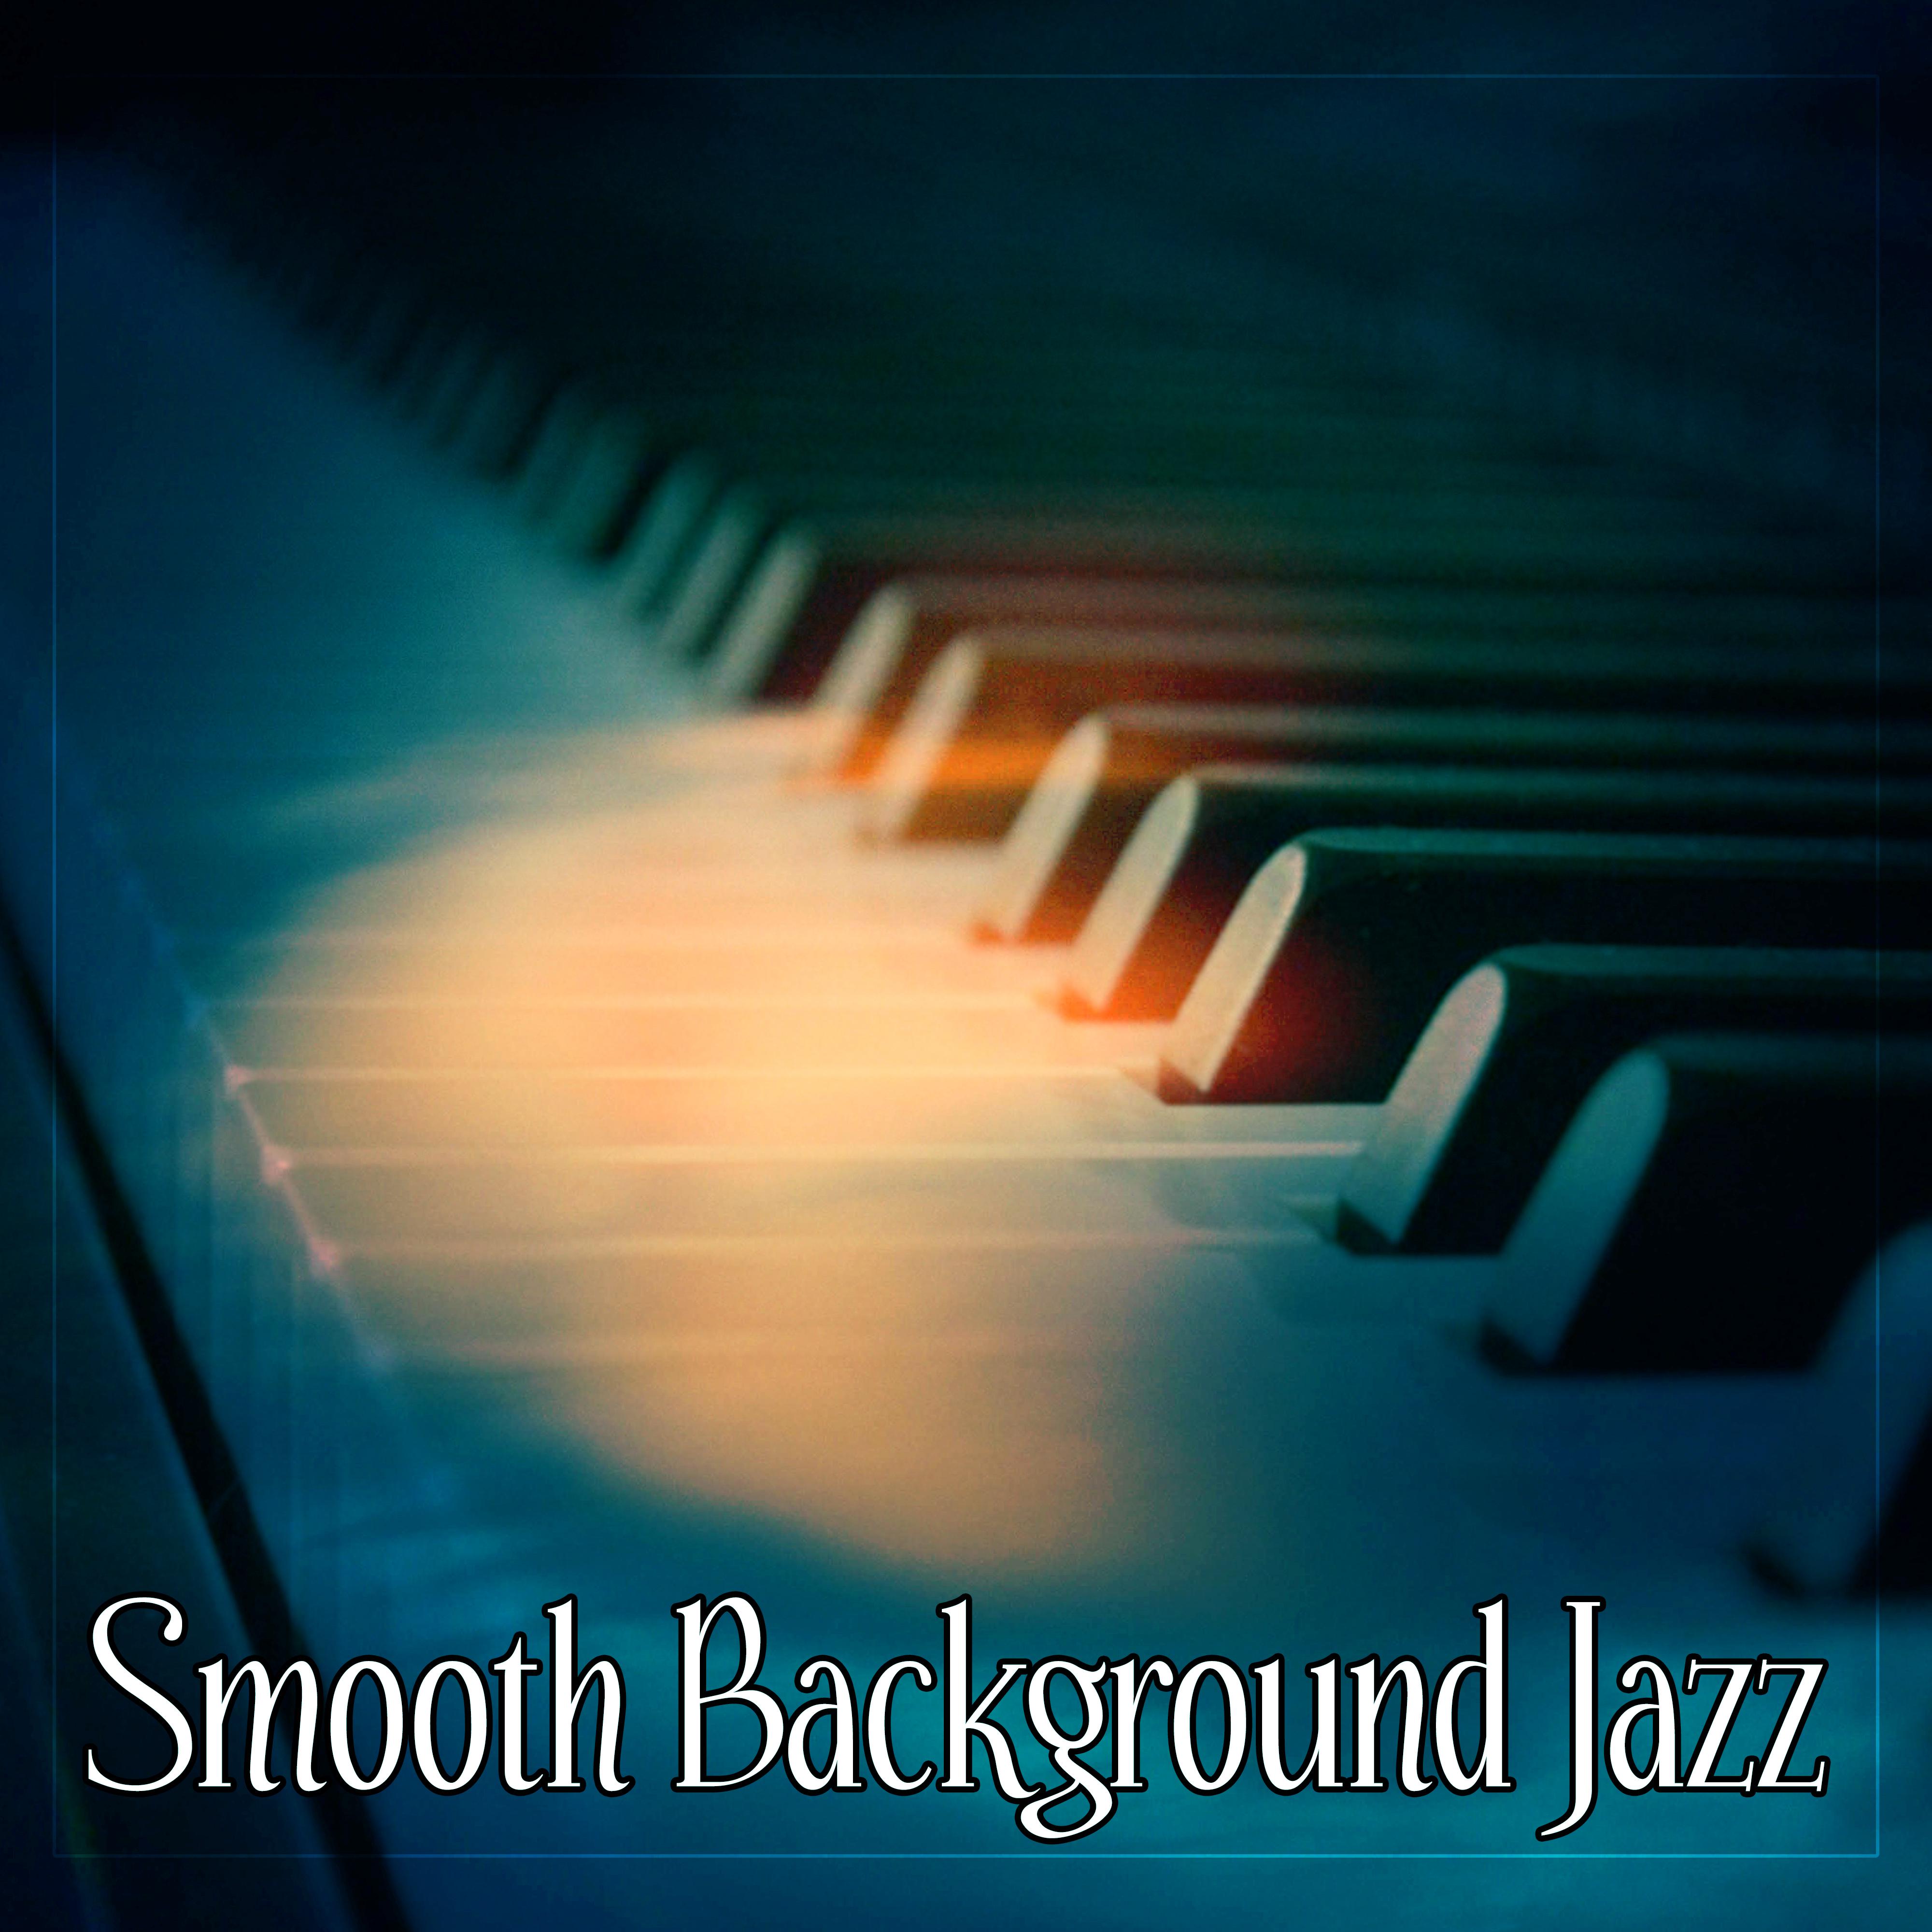 Smooth Background Jazz – Jazz for Relaxation, Relax Yourself, Piano Bar & Restaurant, Blue Piano